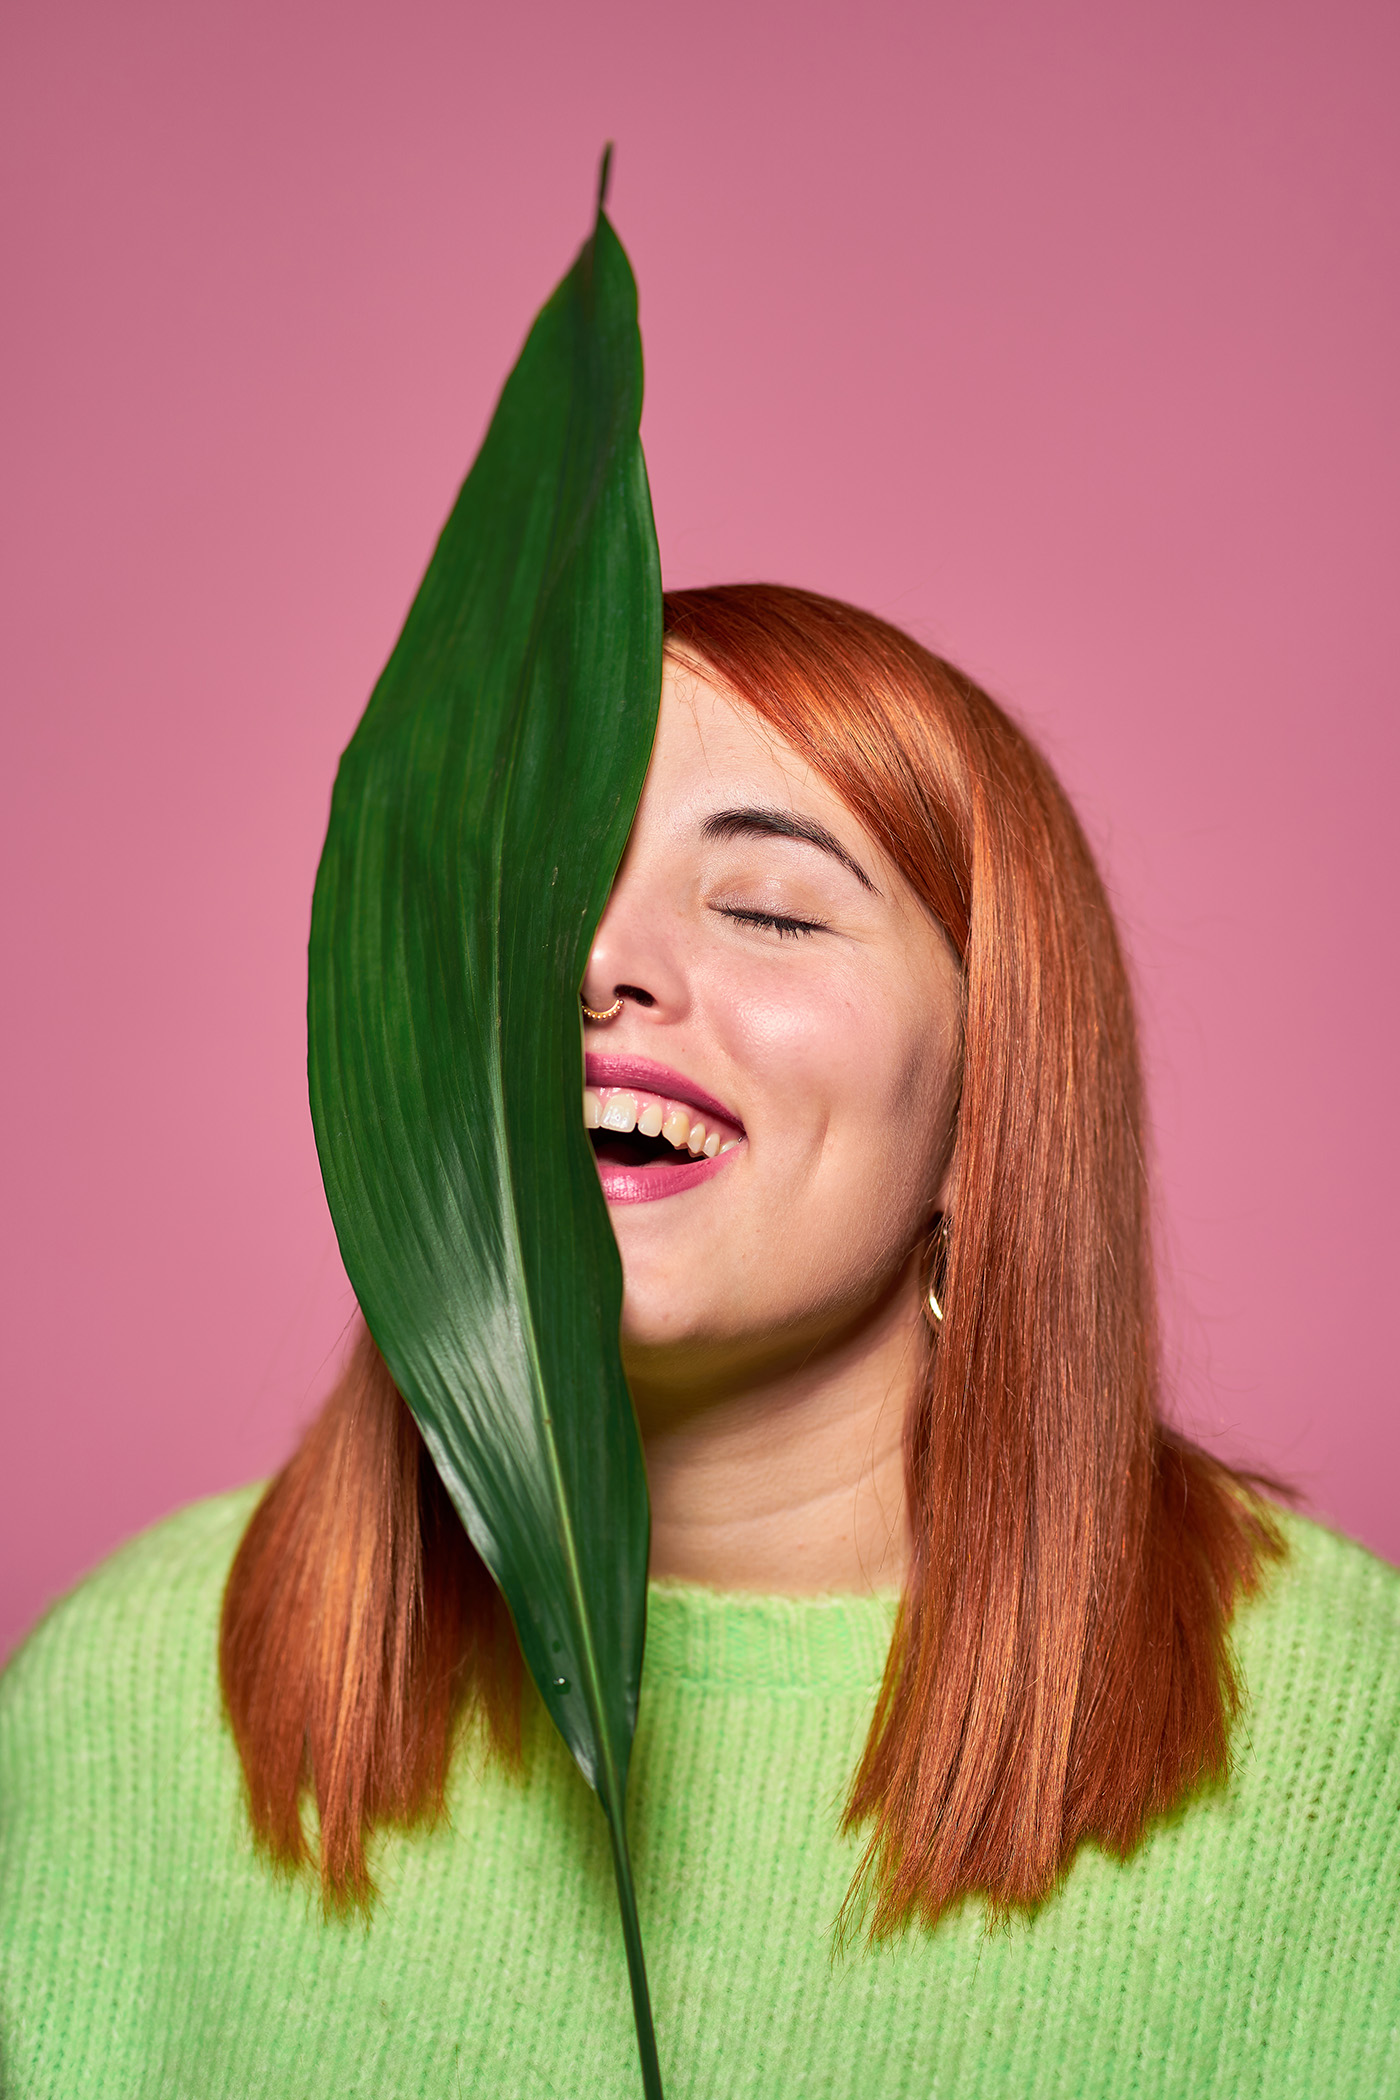 Curvy model with red hair keeping green leaf near face, laughing and eyes closed against pink background